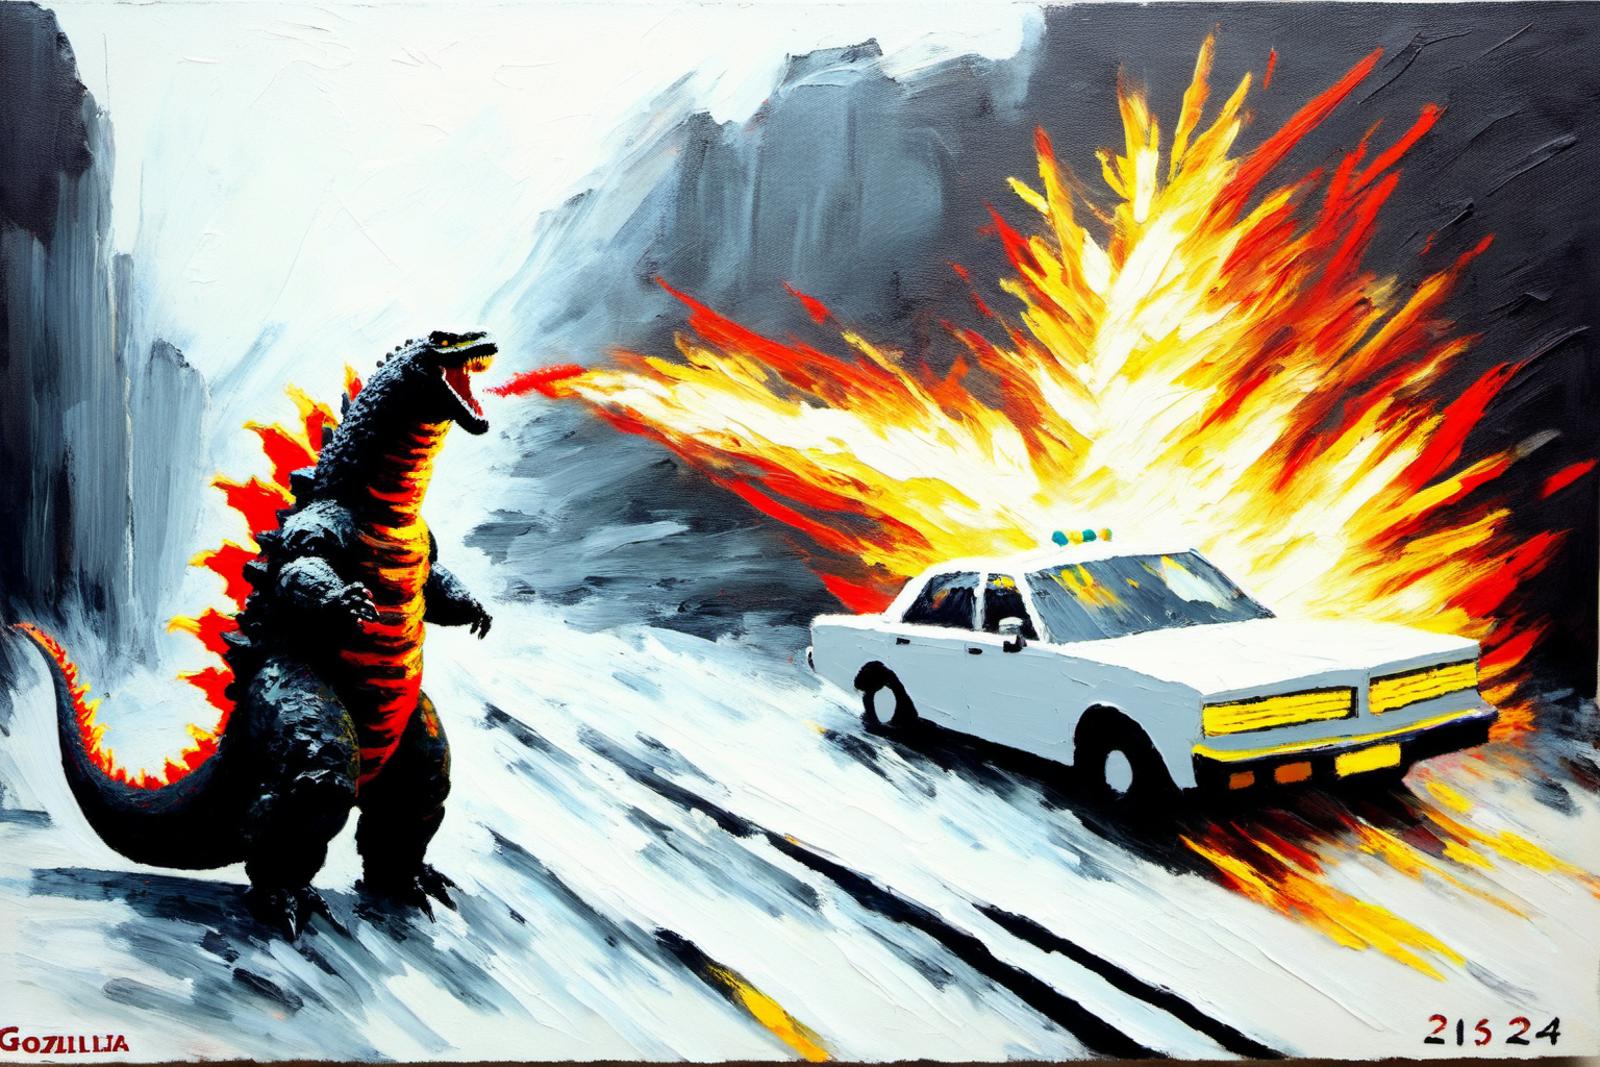 A painting of a Godzilla-like monster attacking a police car.